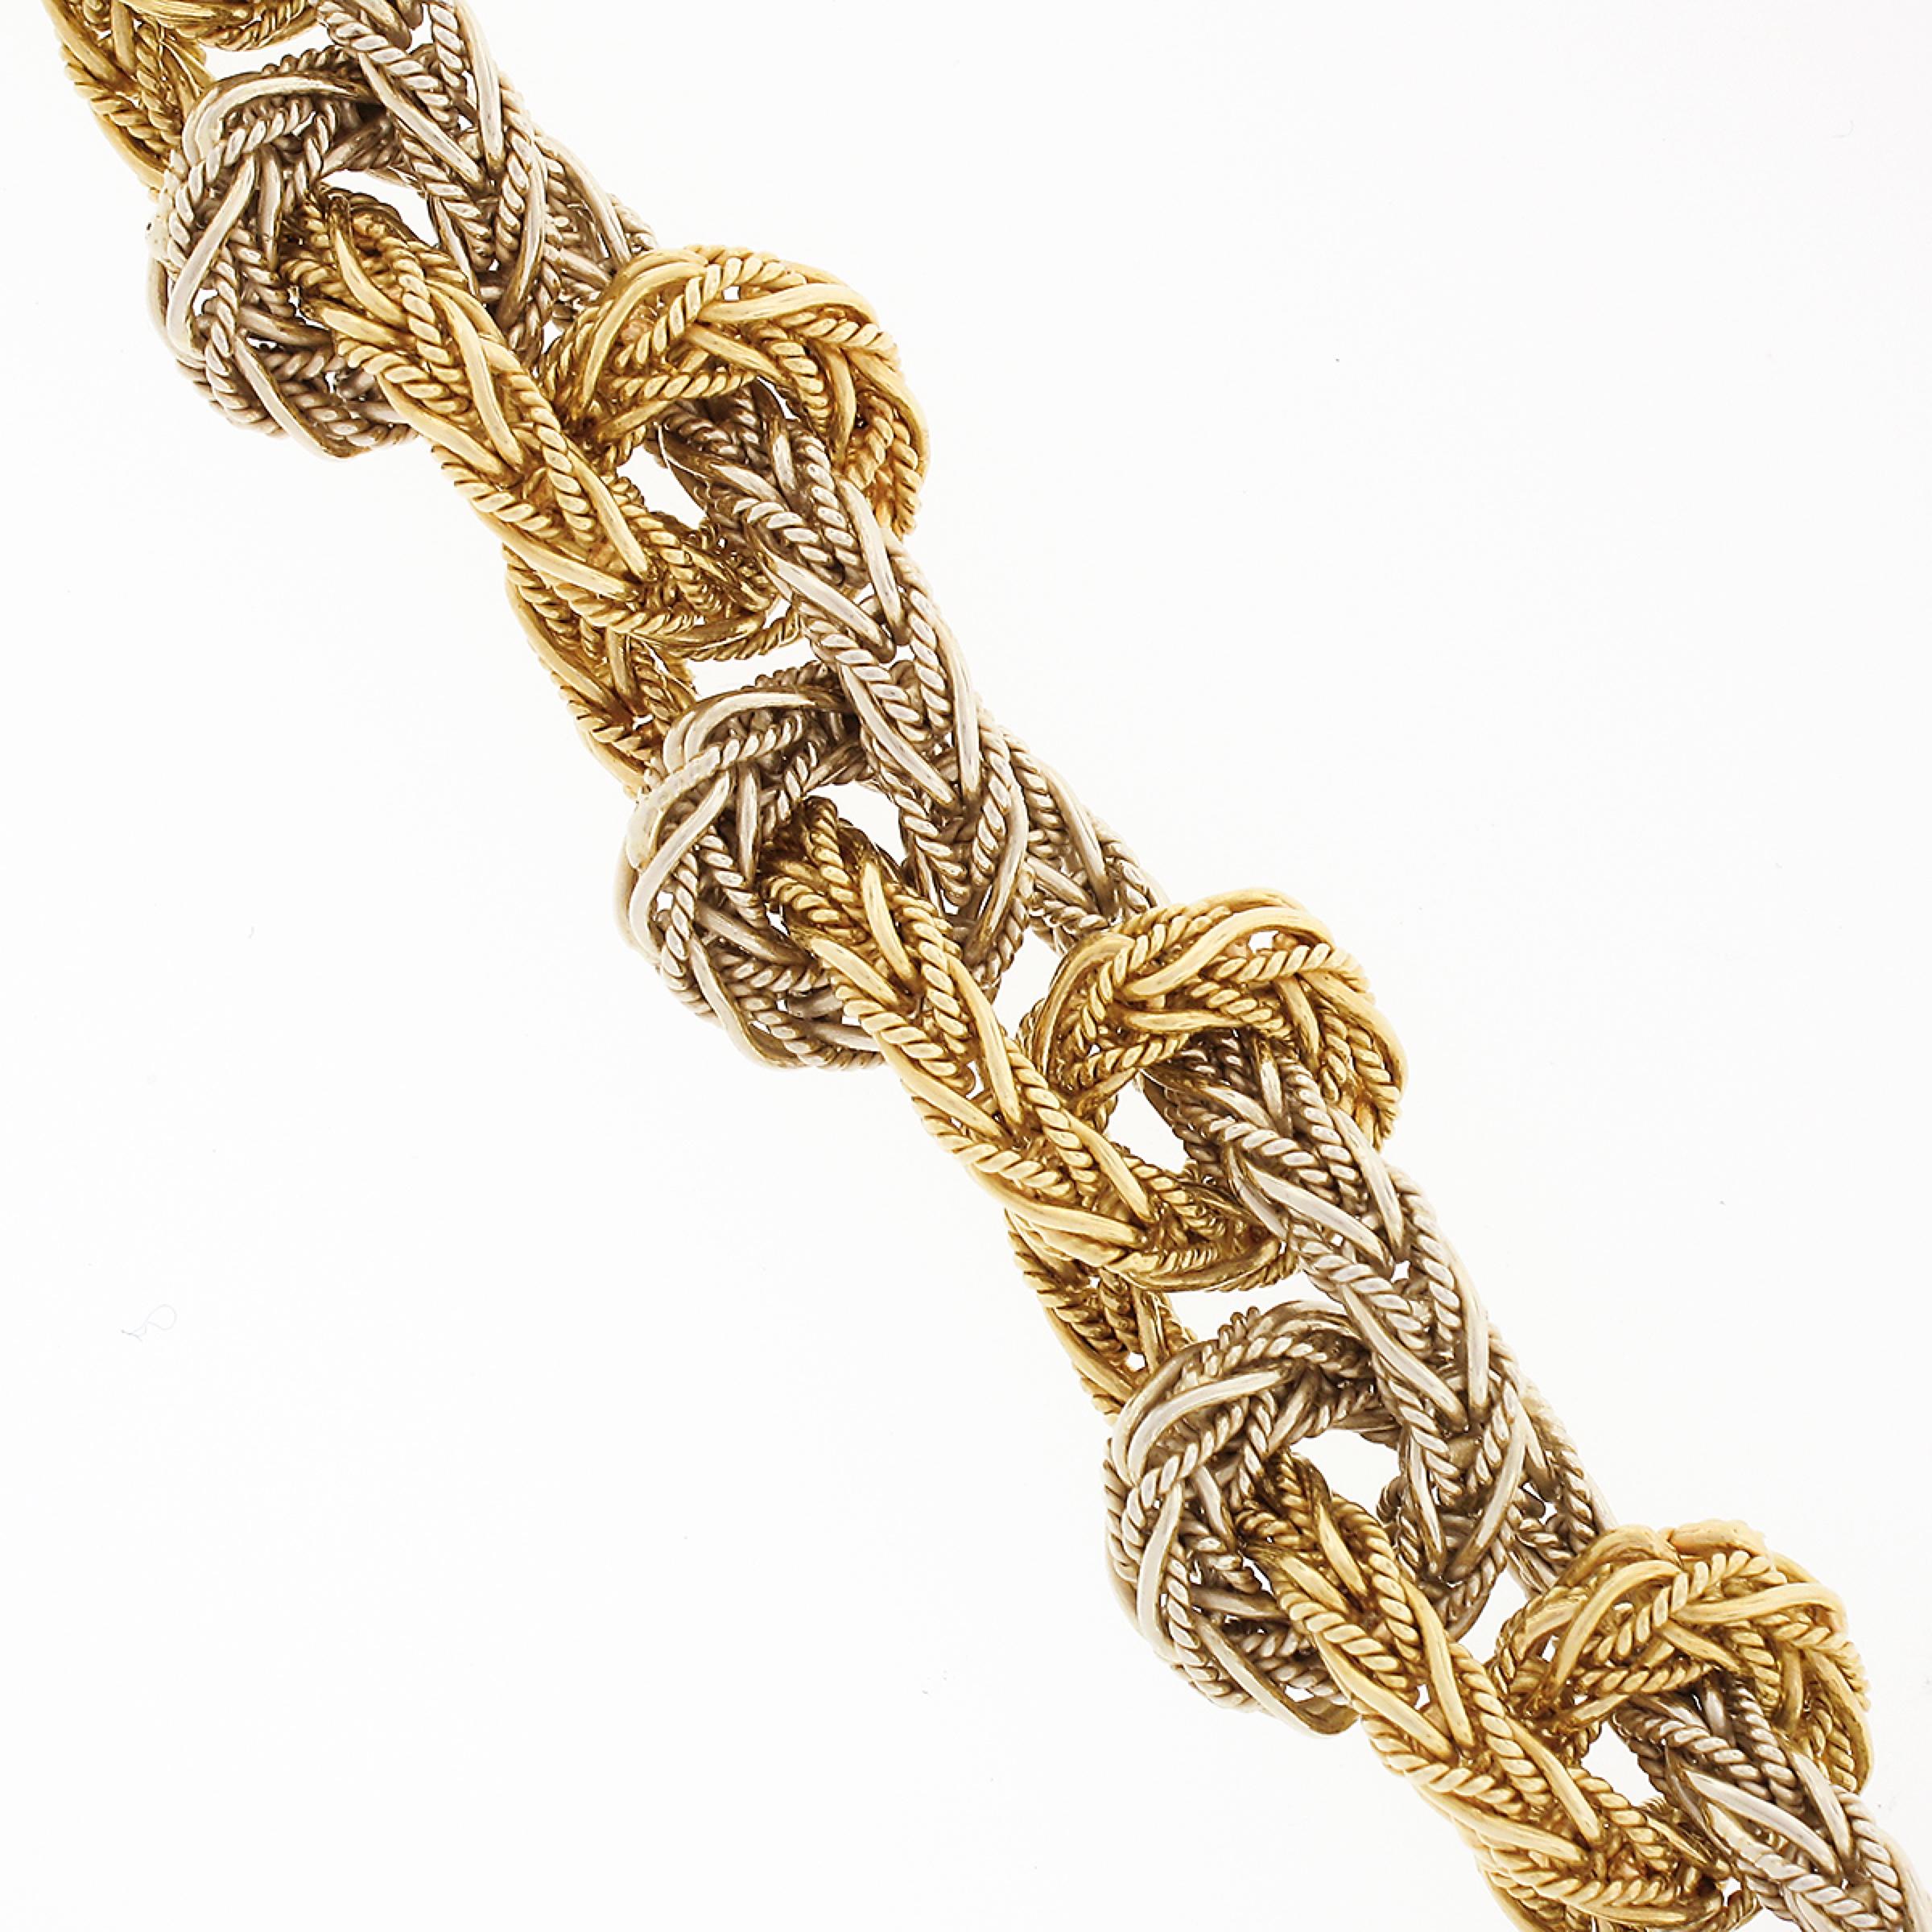 Vintage 18K TT Gold Braided Polished Twisted Wire Wheat Link Into Knot Bracelet For Sale 2